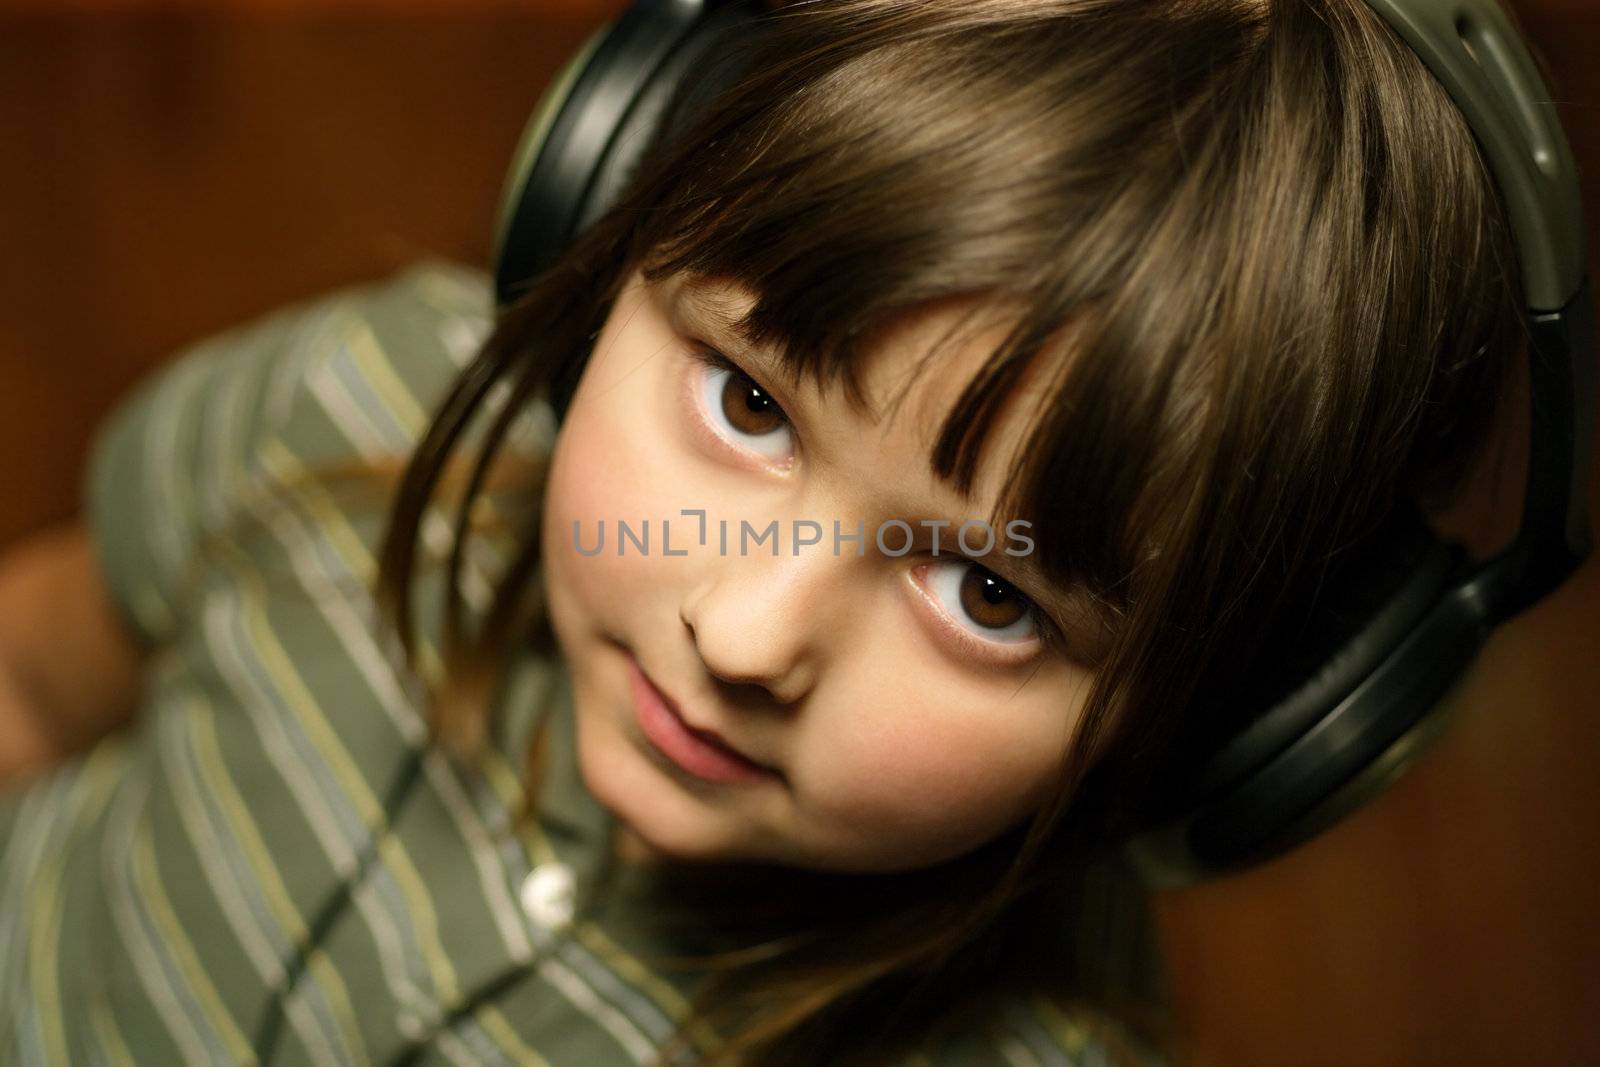 Young music lover by sumners